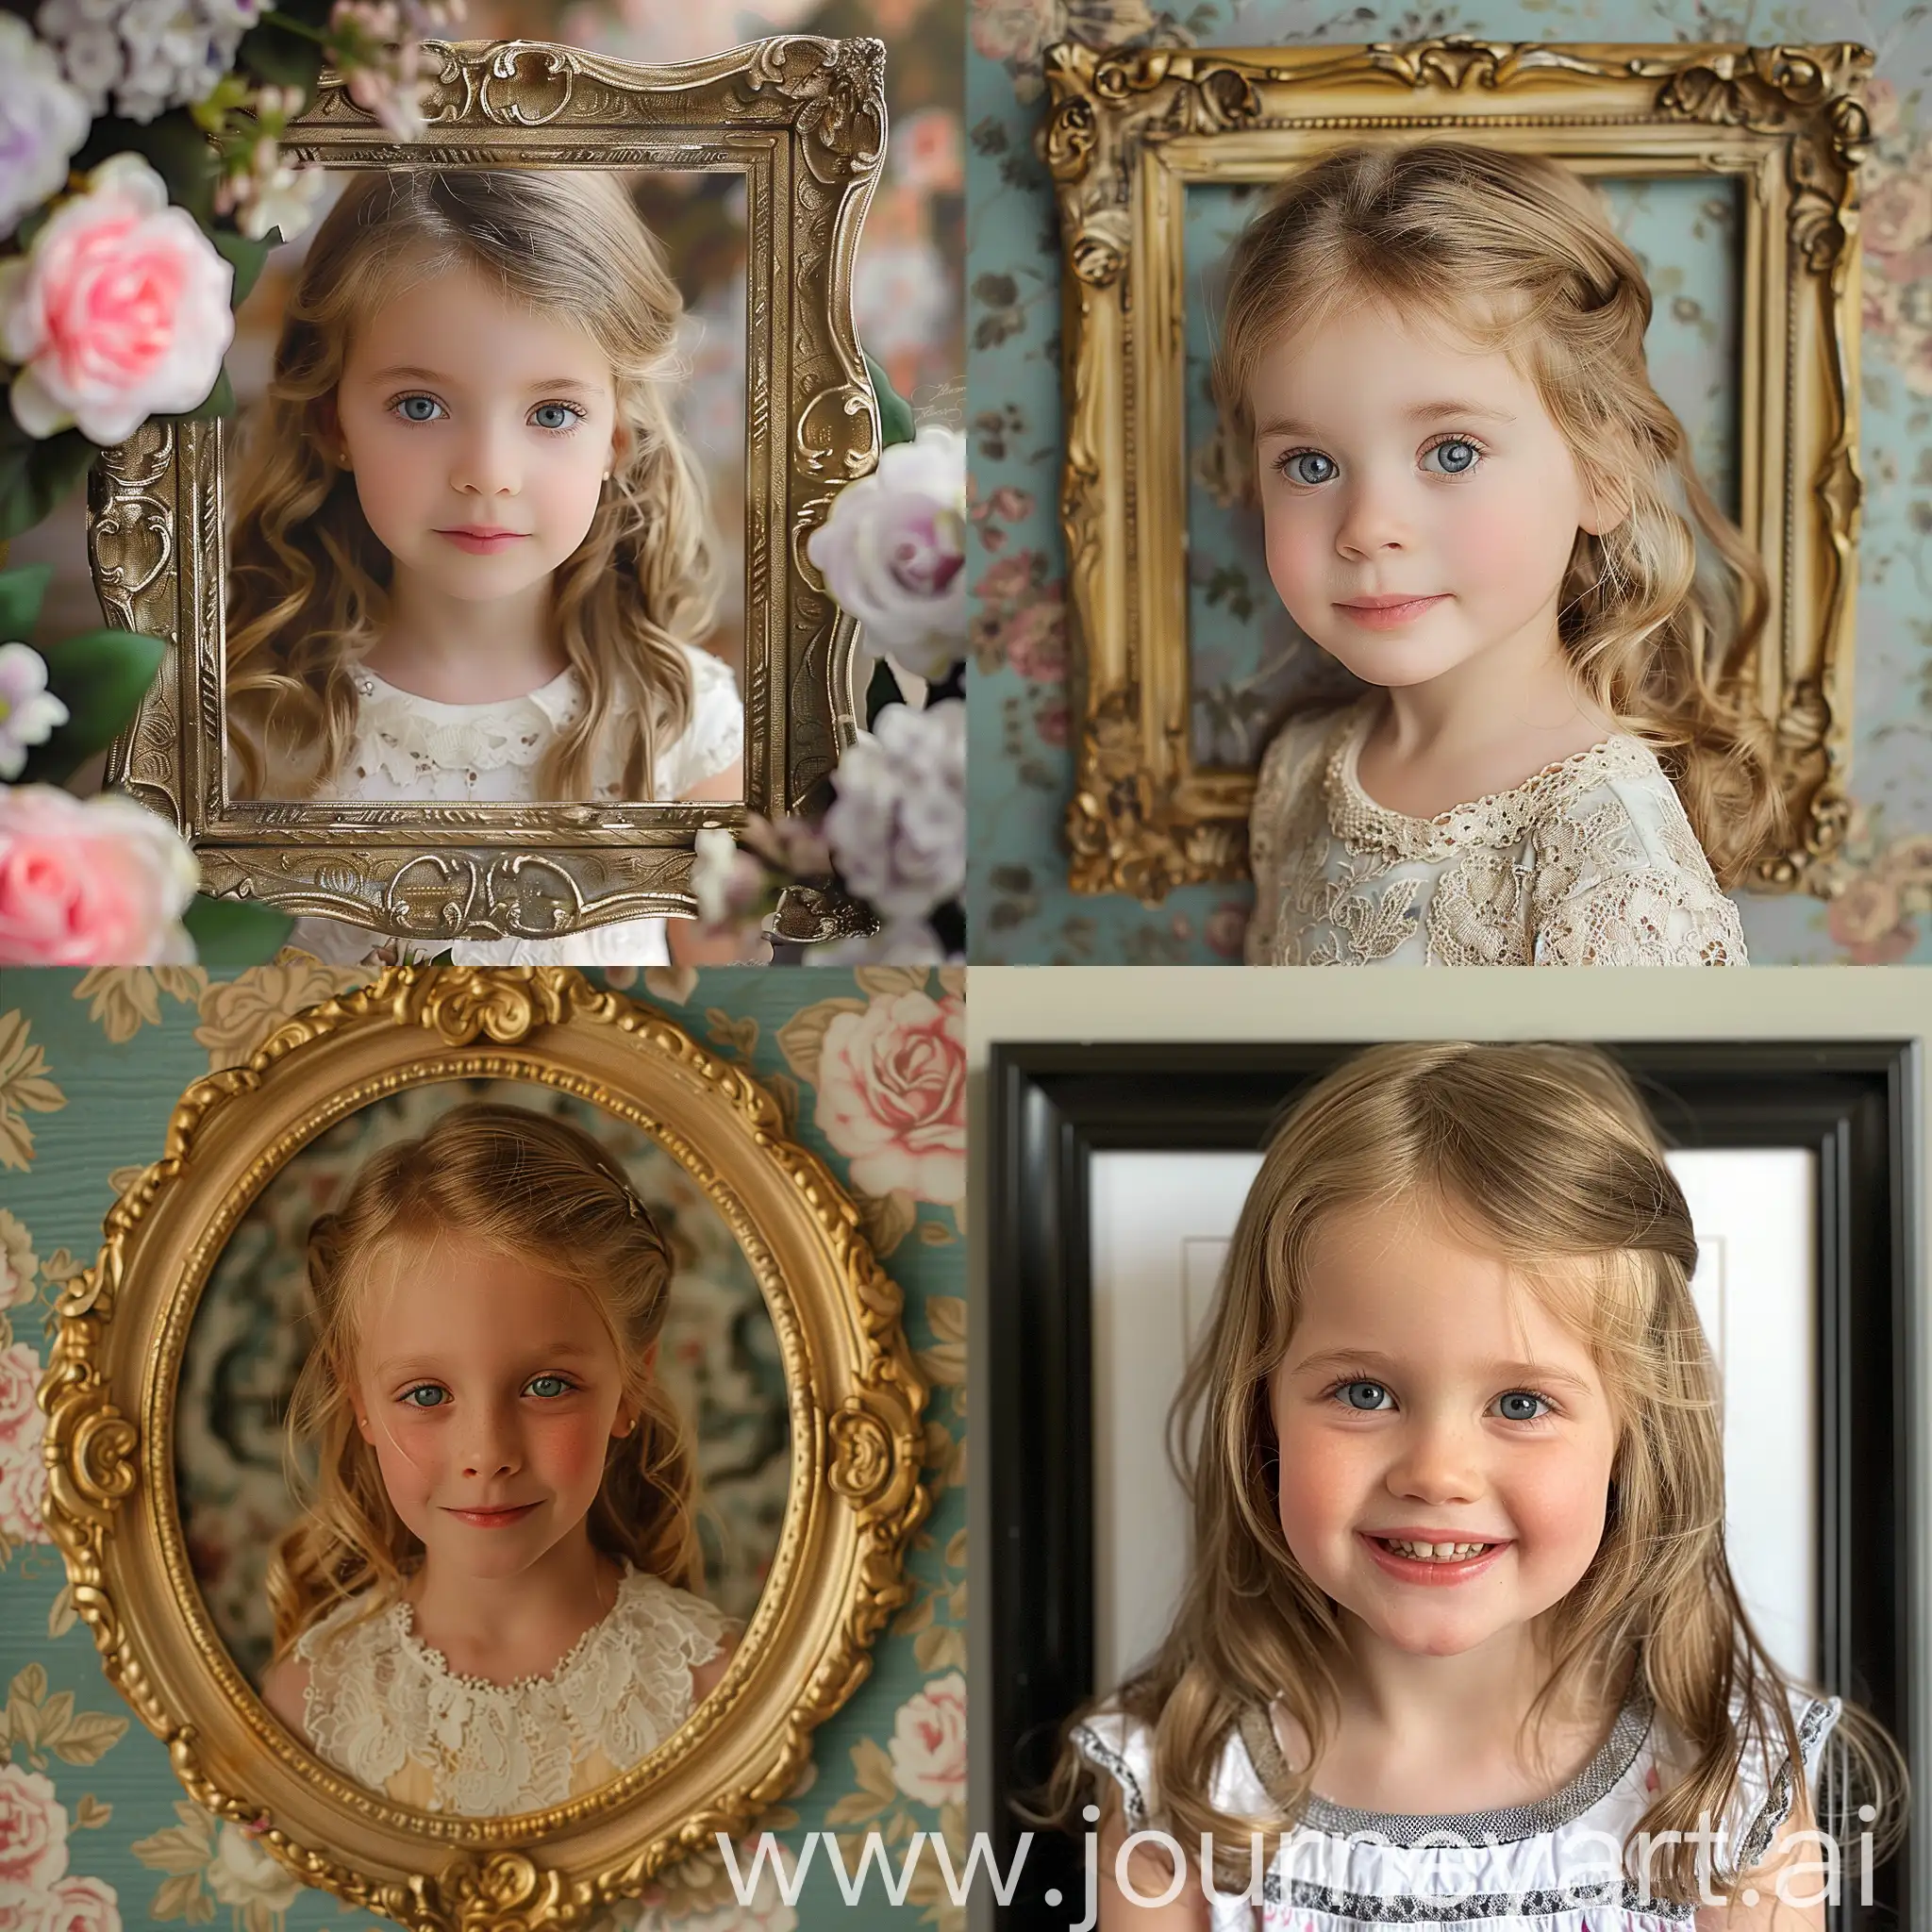 Cherished-Moments-Captured-Eleanor-a-Young-Girl-Immortalized-in-Frame